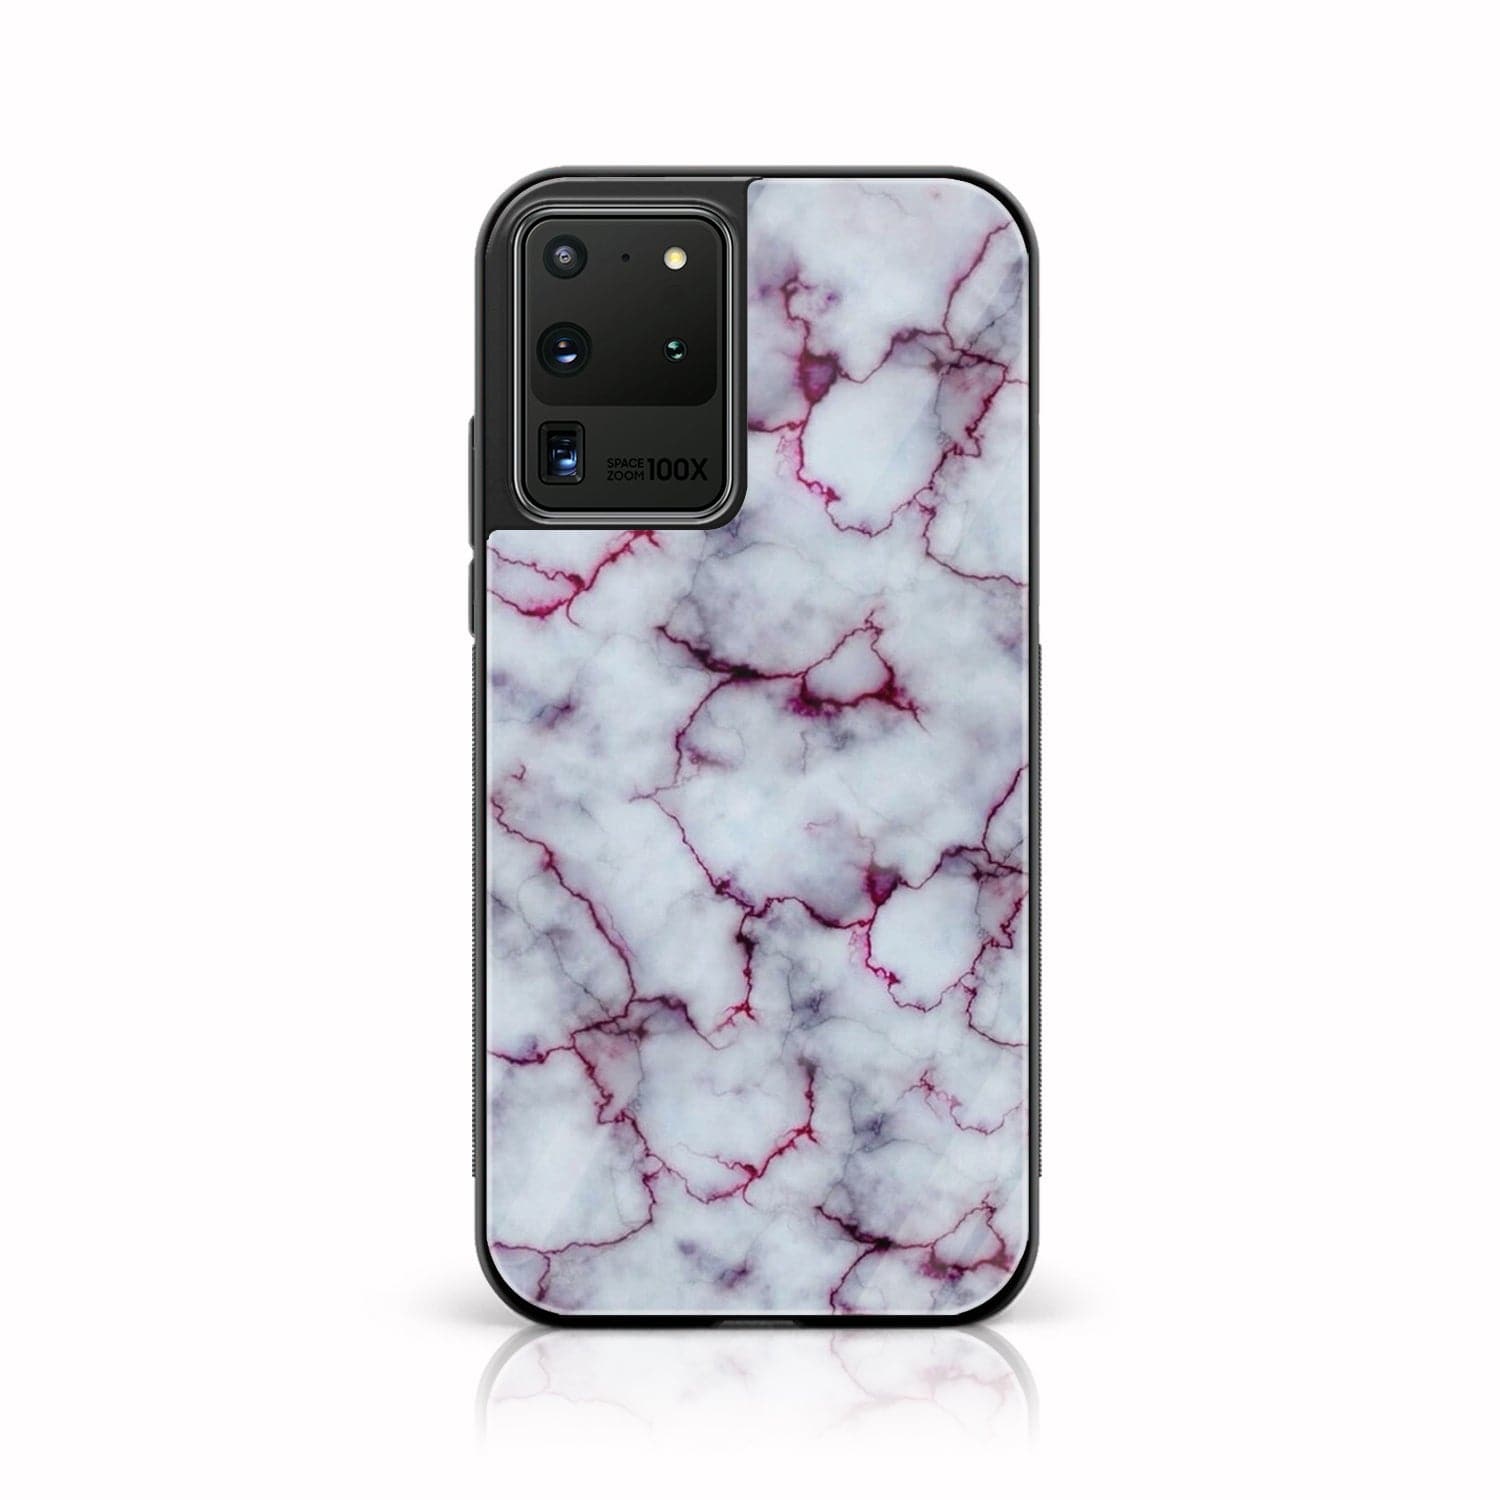 Sasmung Galaxy S20 Ultra - White Marble Series - Premium Printed Glass soft Bumper shock Proof Case